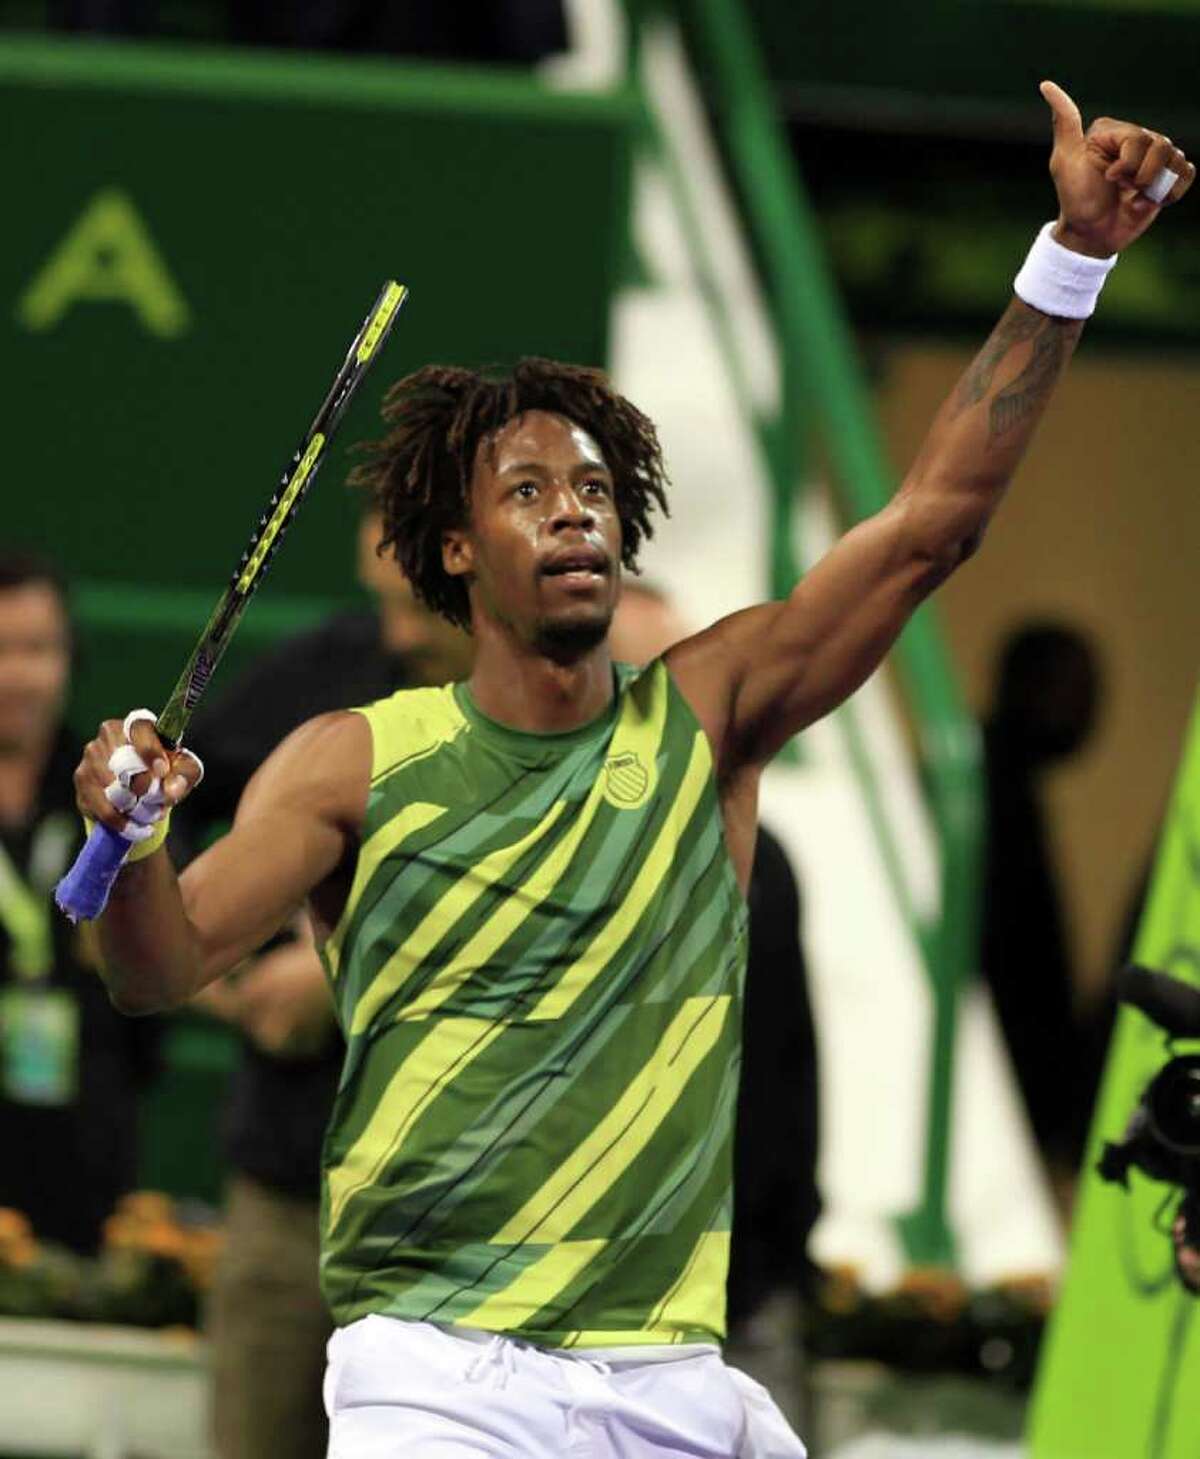 Gael Monfils celebrates after beating second-ranked Rafael Nadal 6-3, 6-4 in the semifinals of the Qatar Open in Doha on Friday.